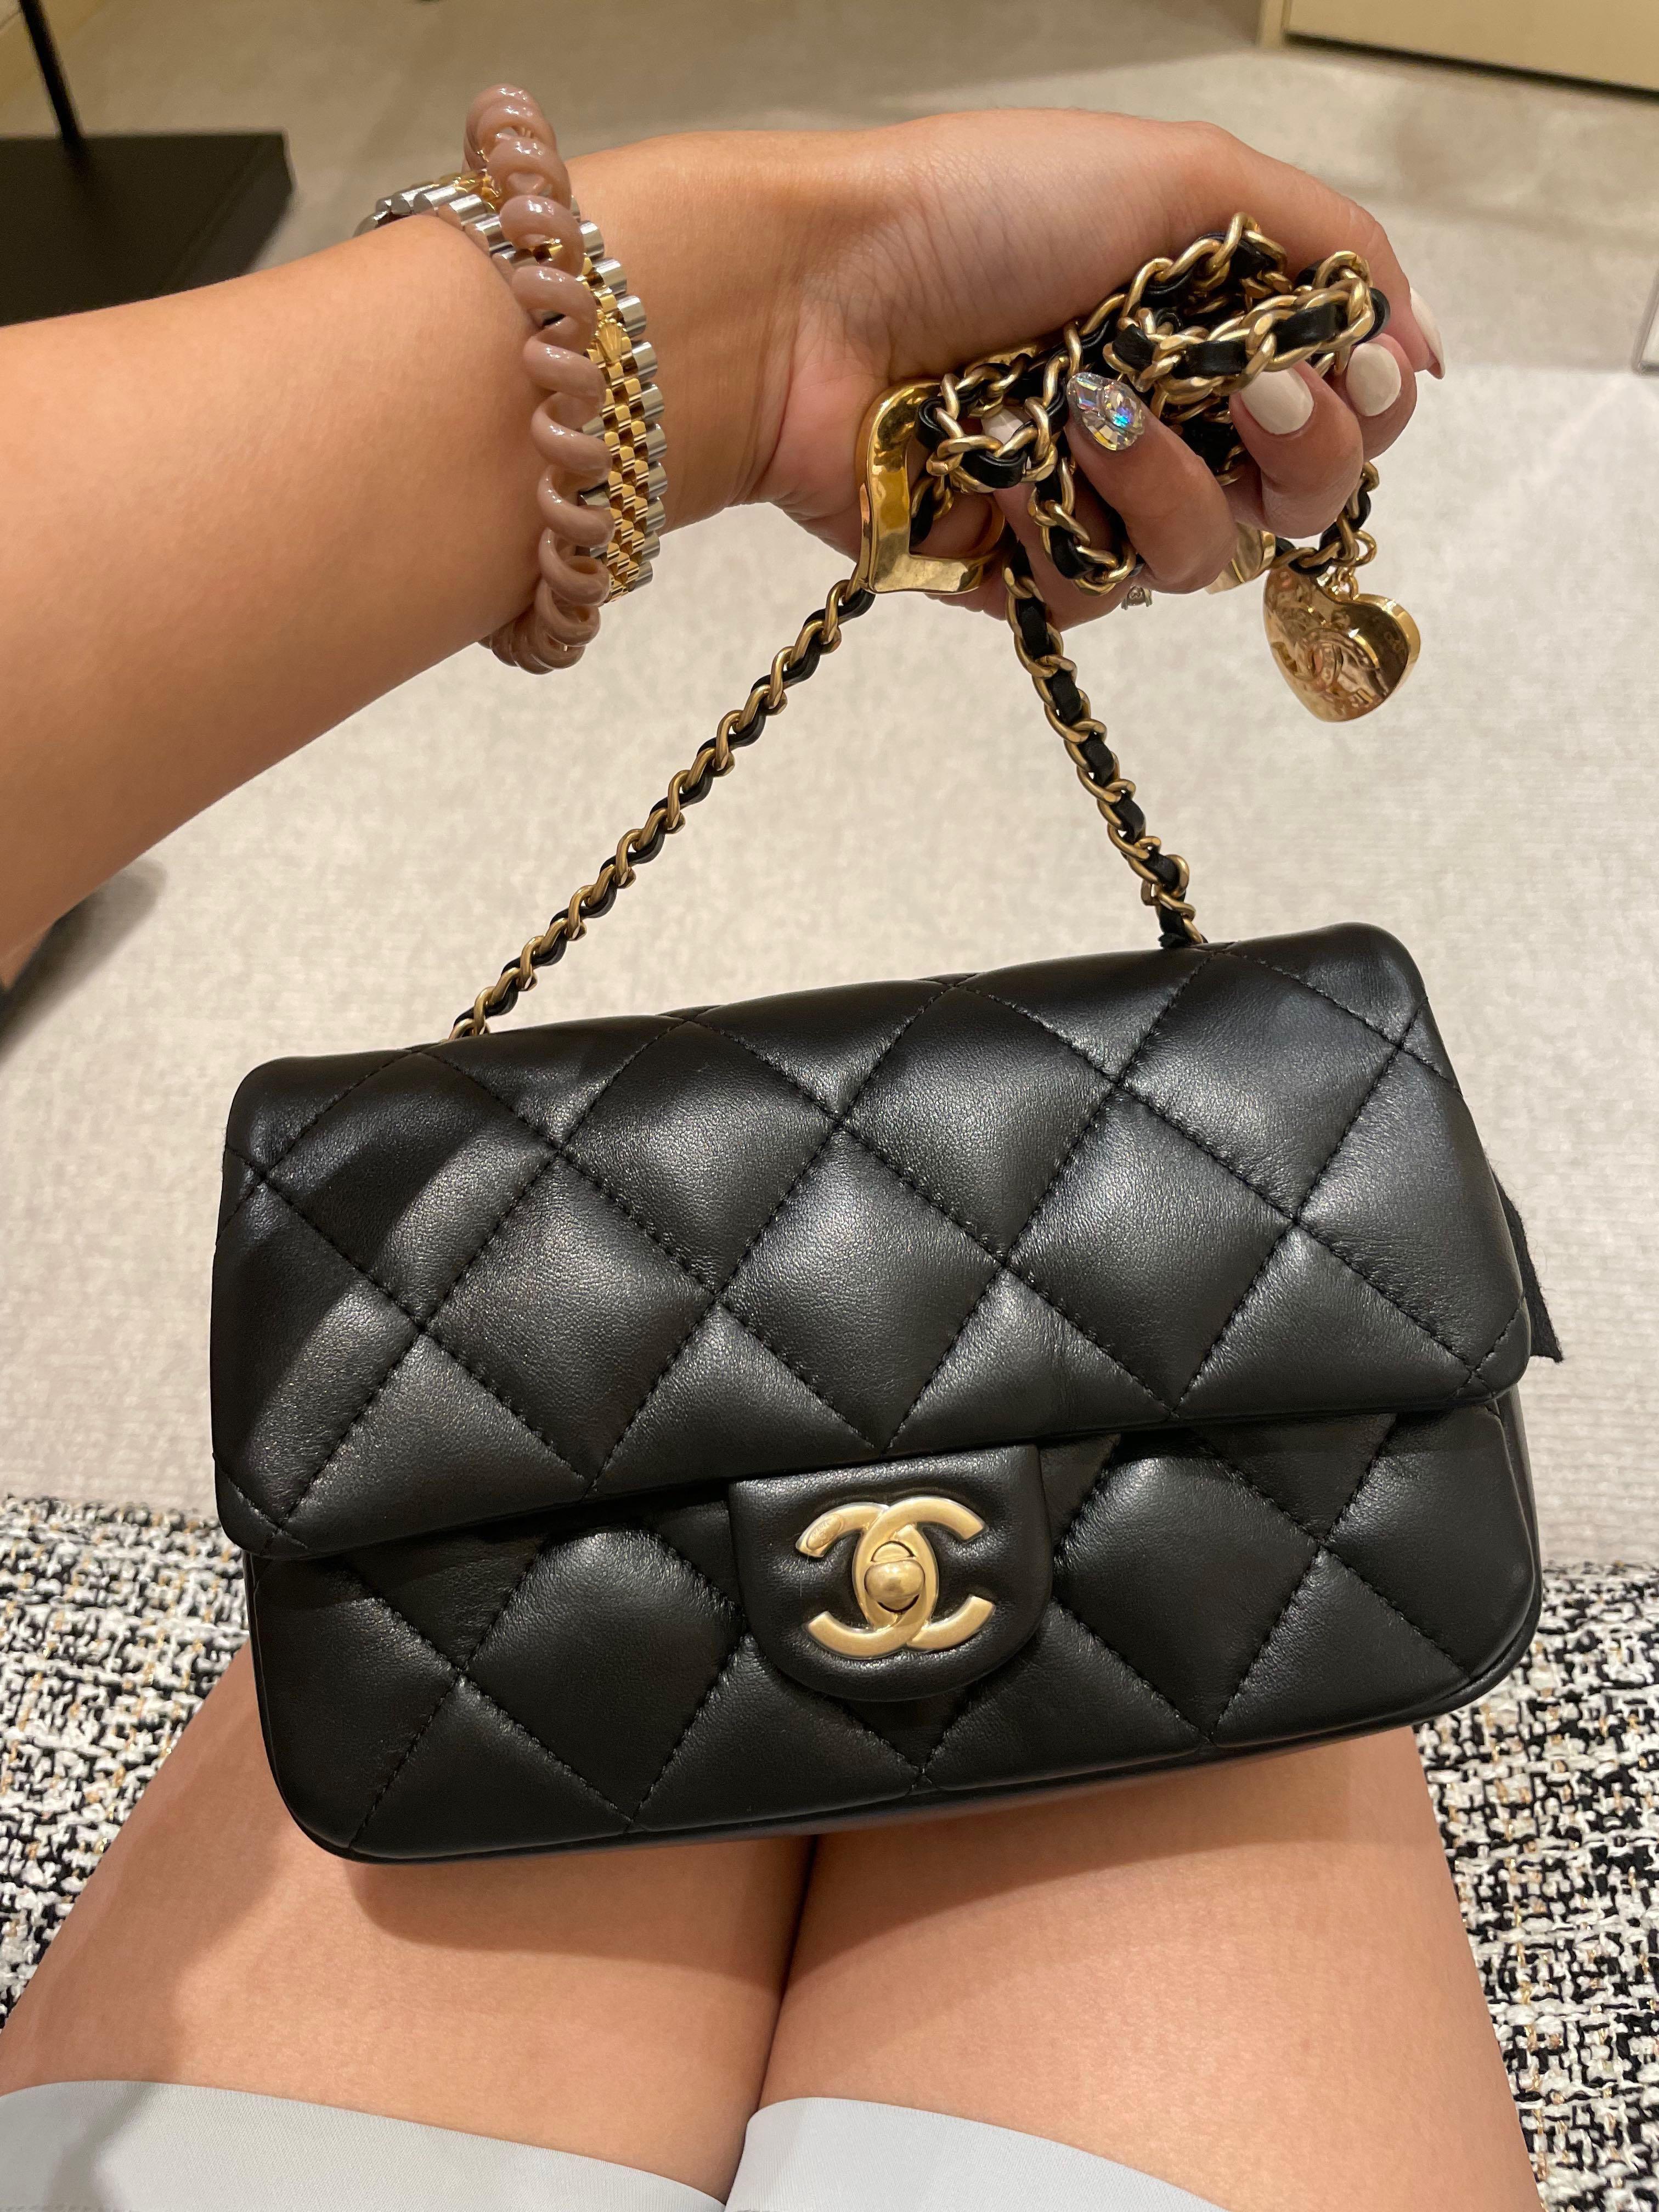 How Much Is A Chanel Bag? An Overview, myGemma